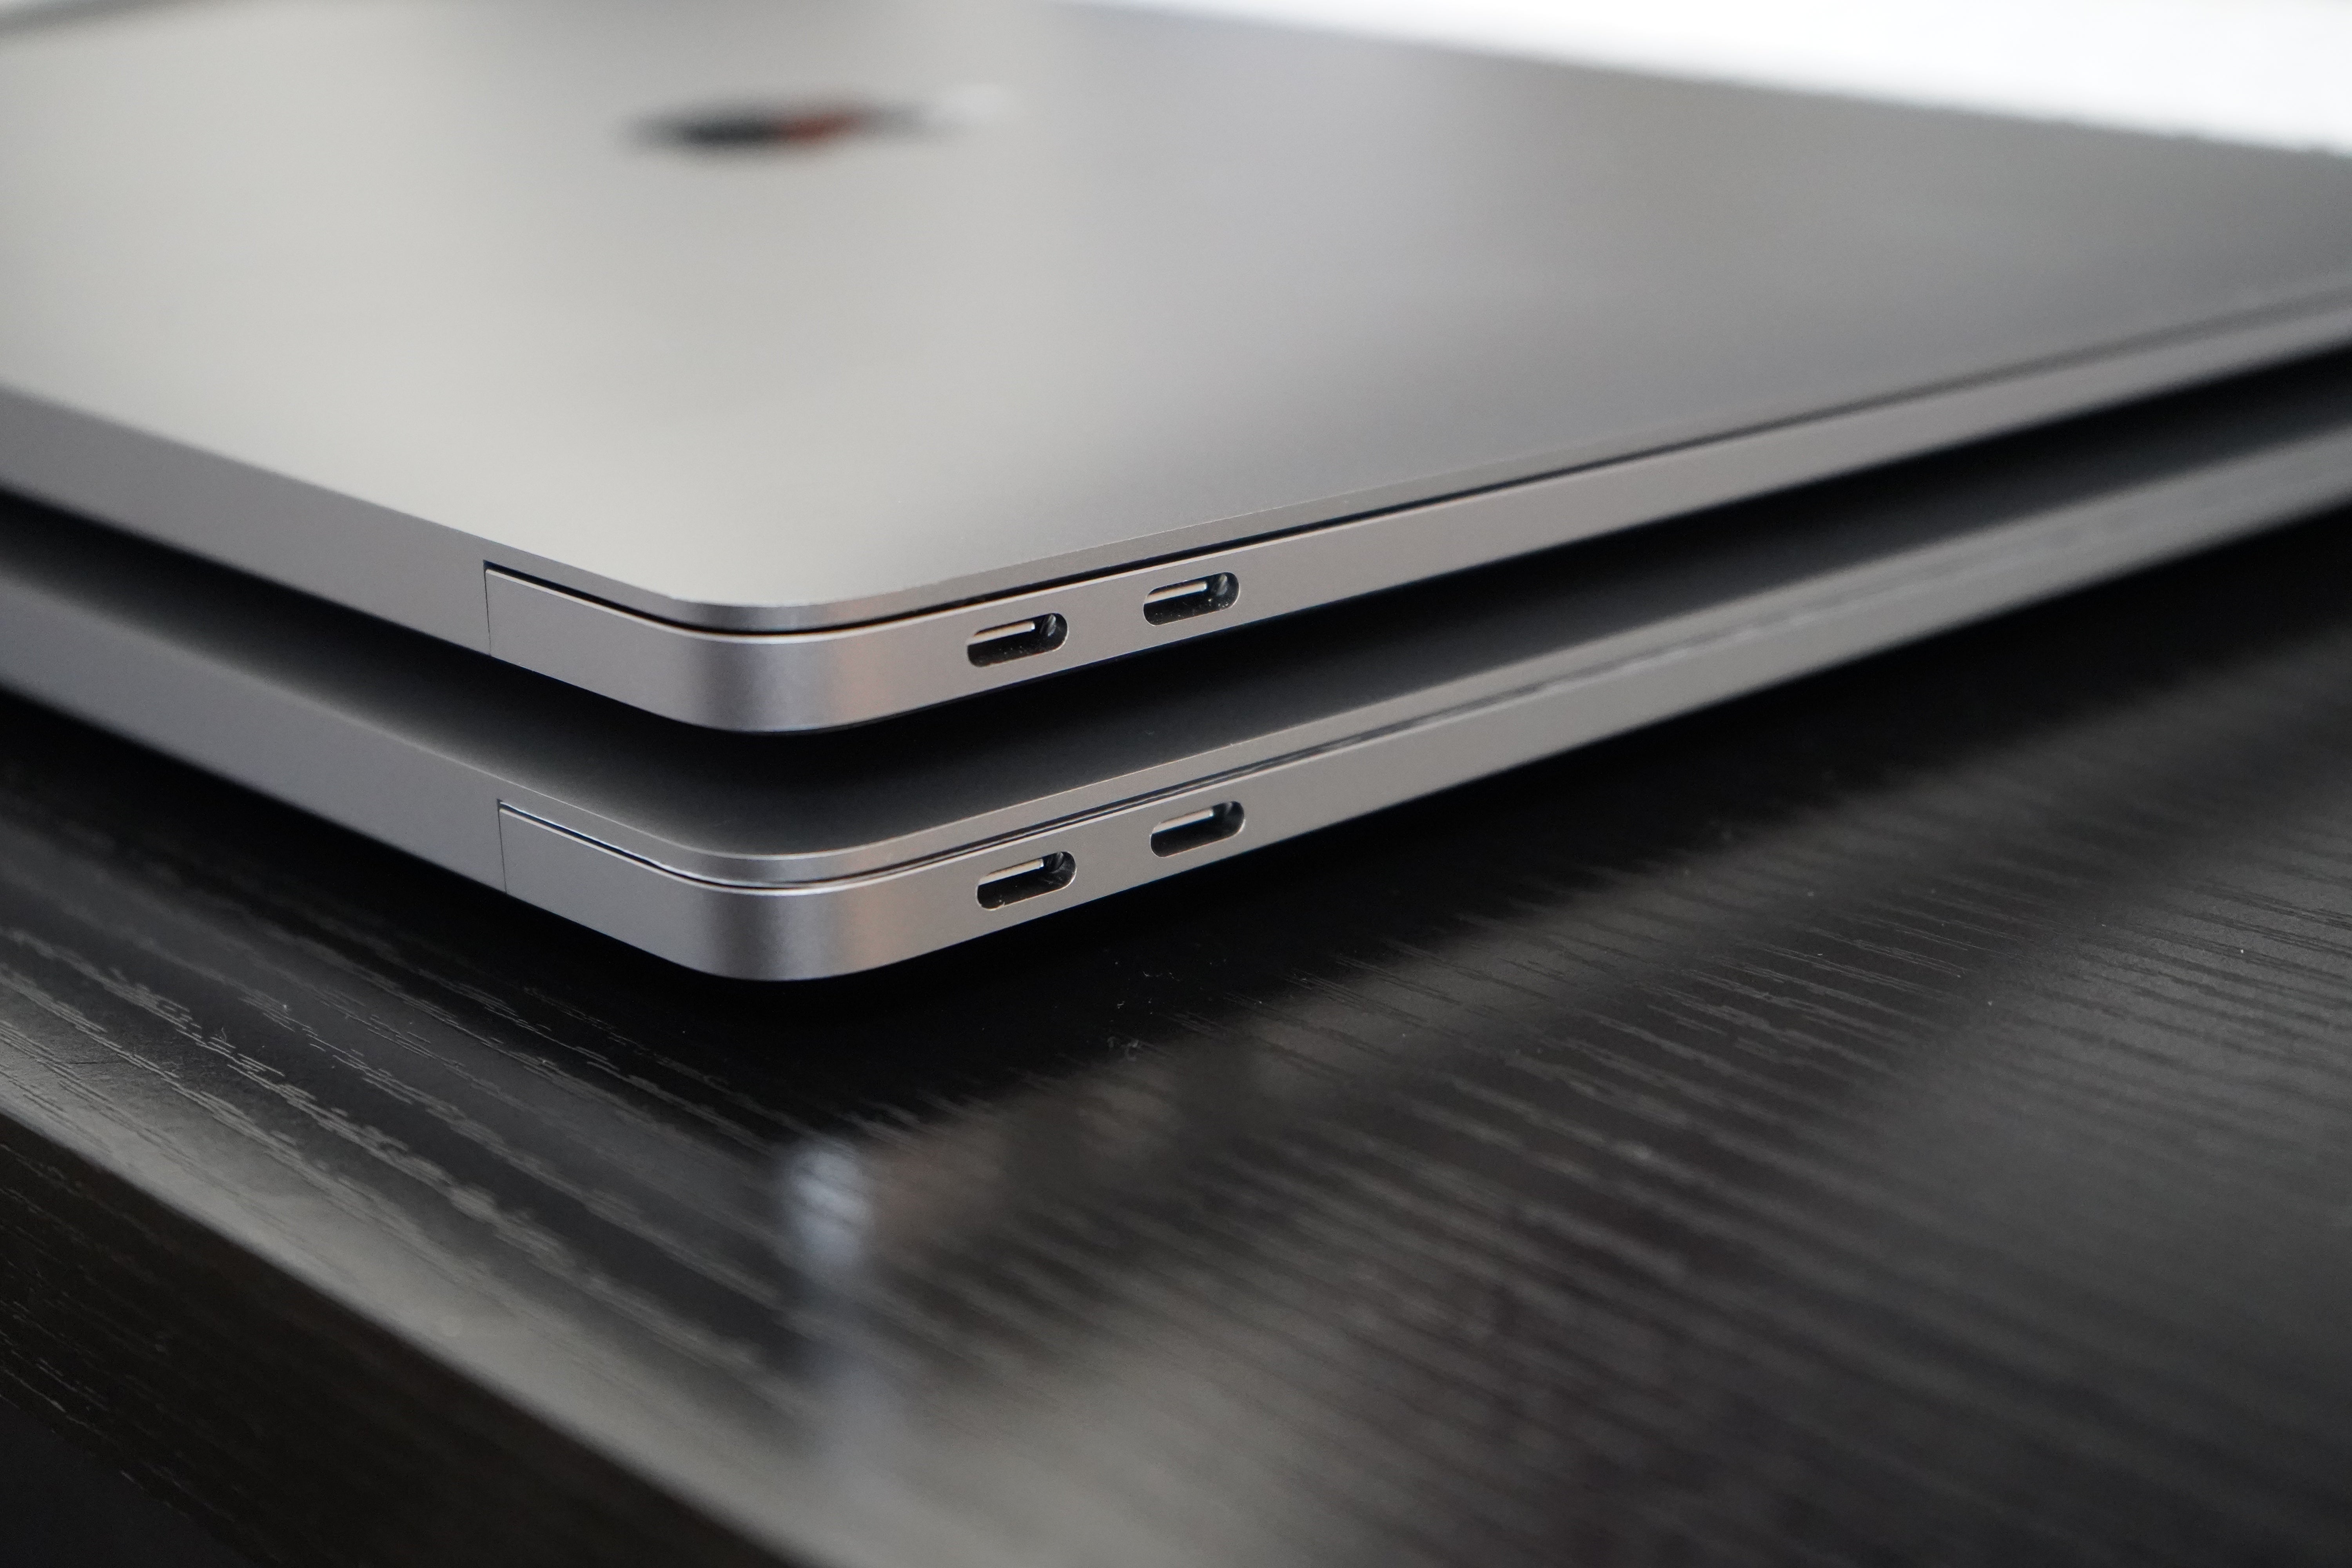 MacBook Air M1 review: An absolutely stunning debut for Apple silicon